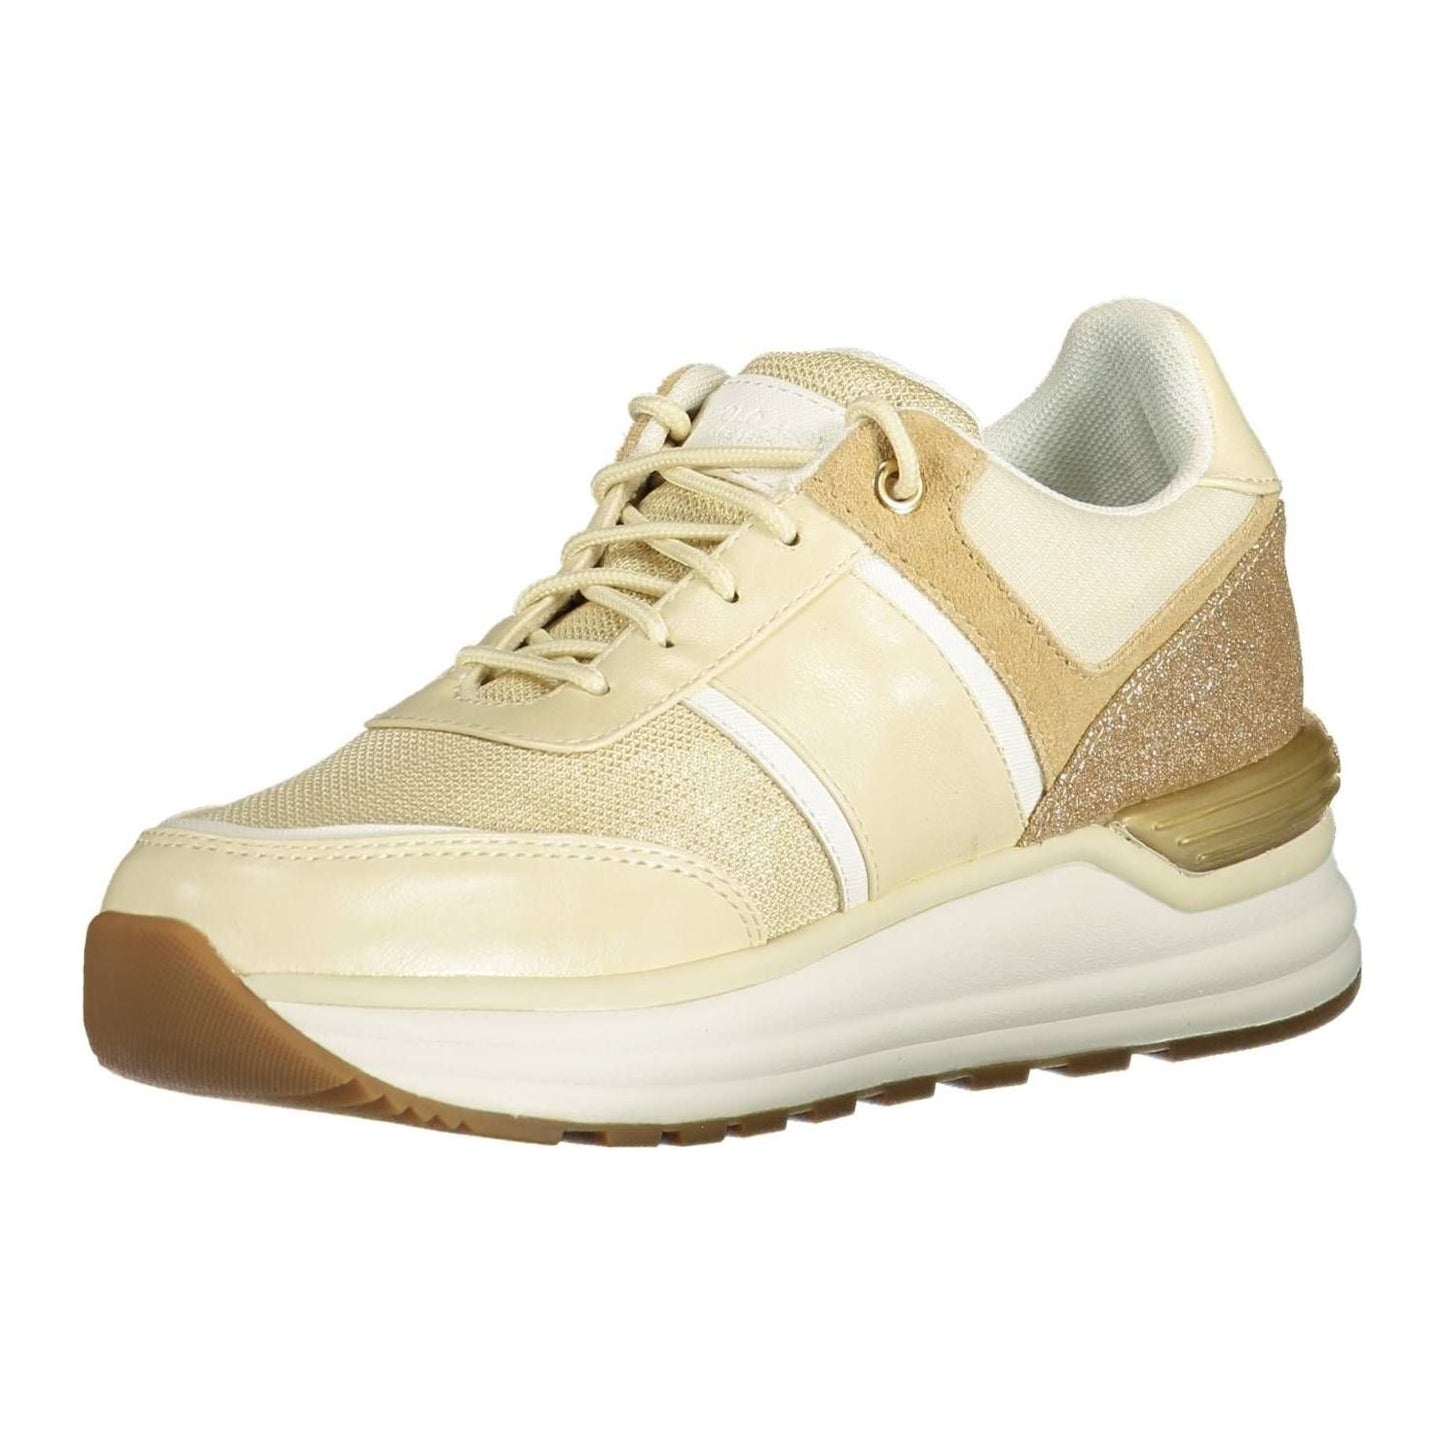 U.S. POLO ASSN. Beige ECO SUEDE Lace-up Sneakers beige-eco-suede-lace-up-sneakers